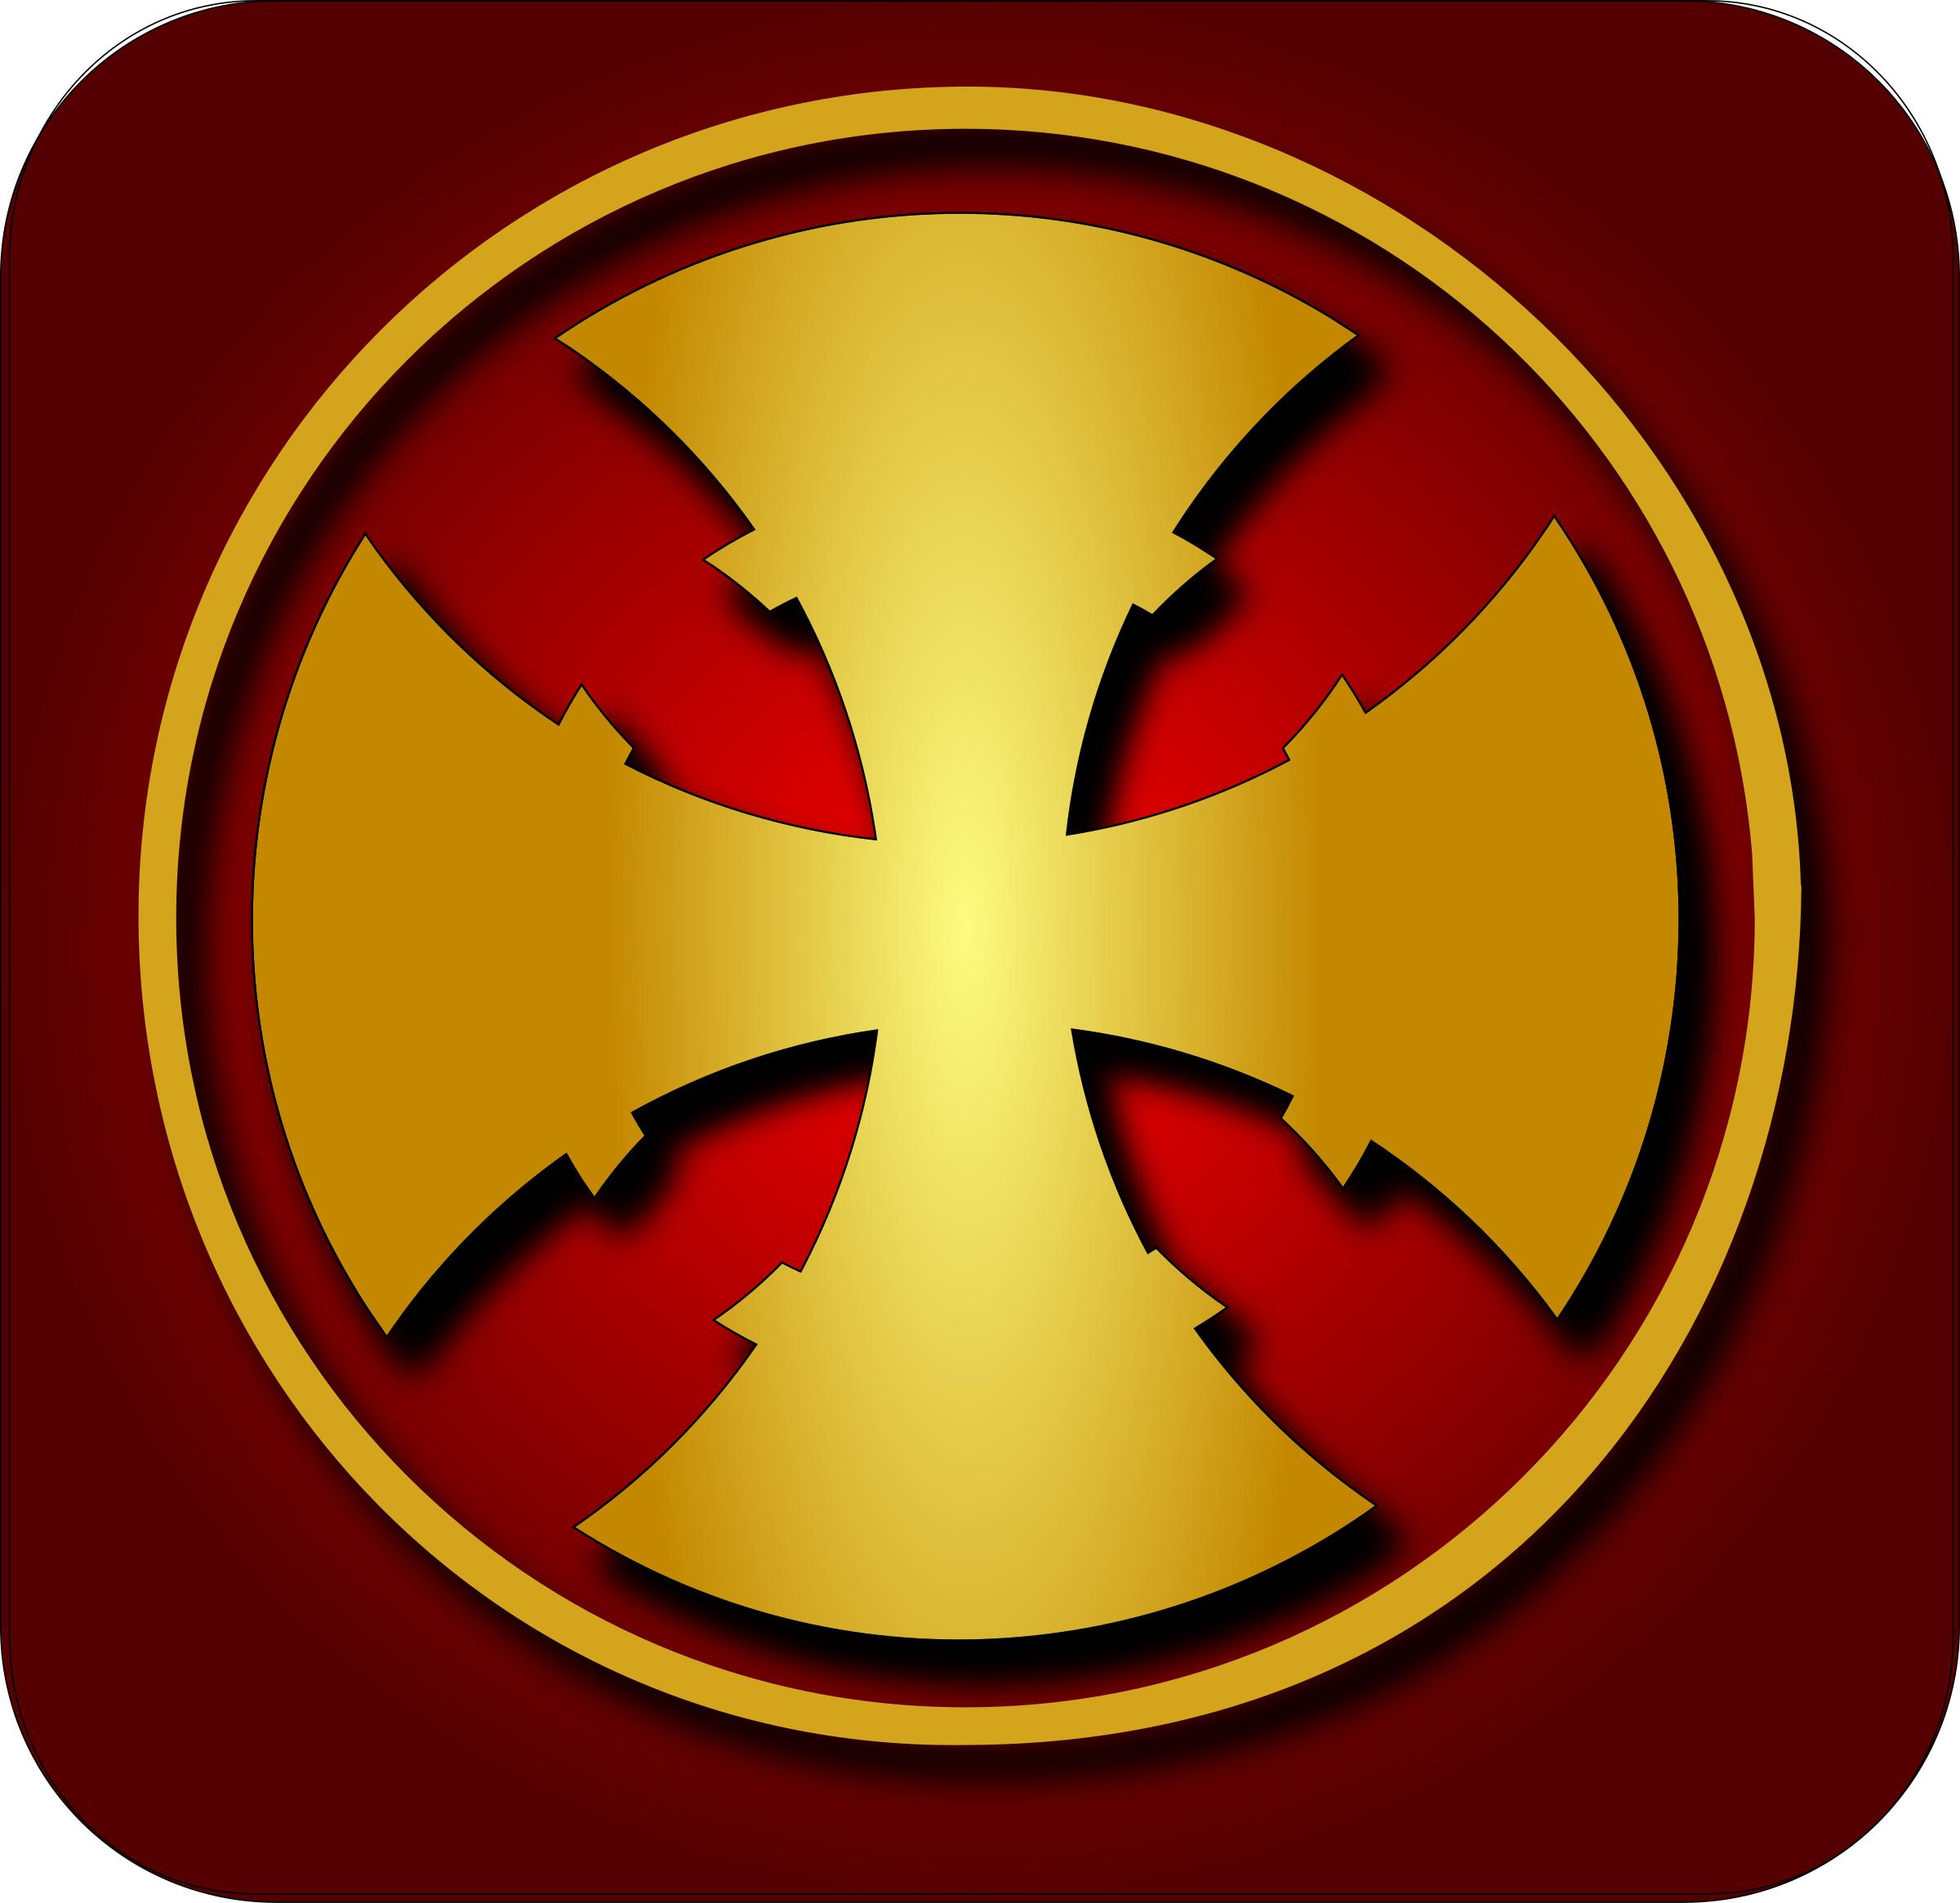 Golden cross 1 PNG icons